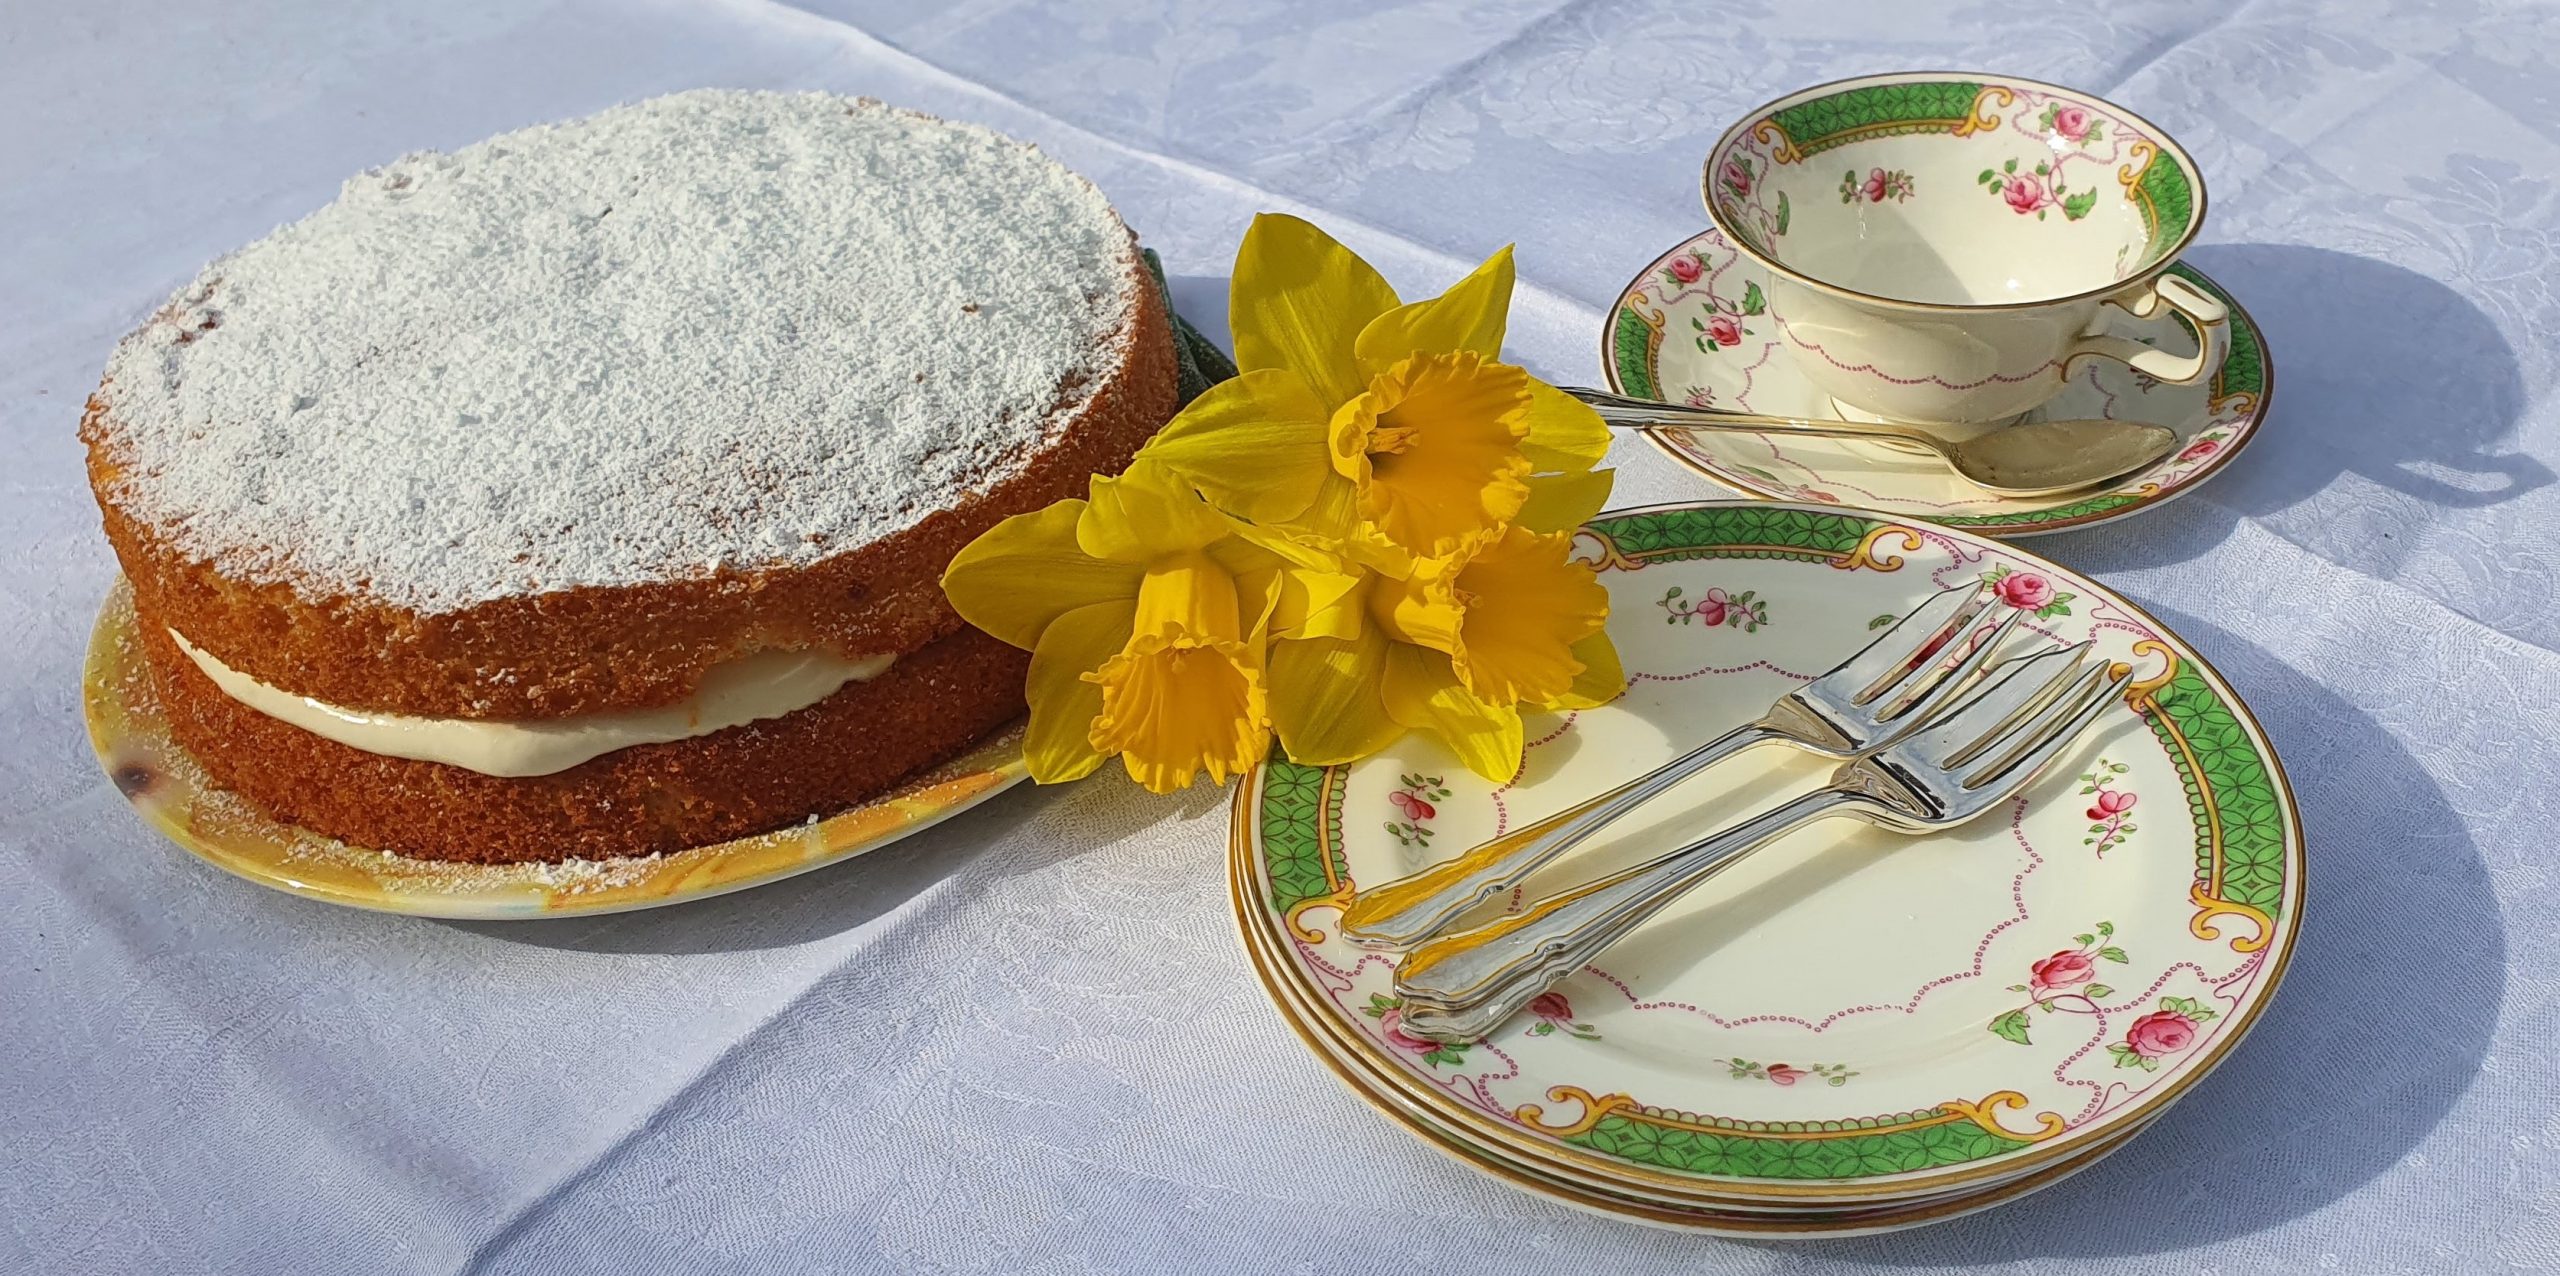 Lemon cake decorated with a daffodil, with plates and cups beside it